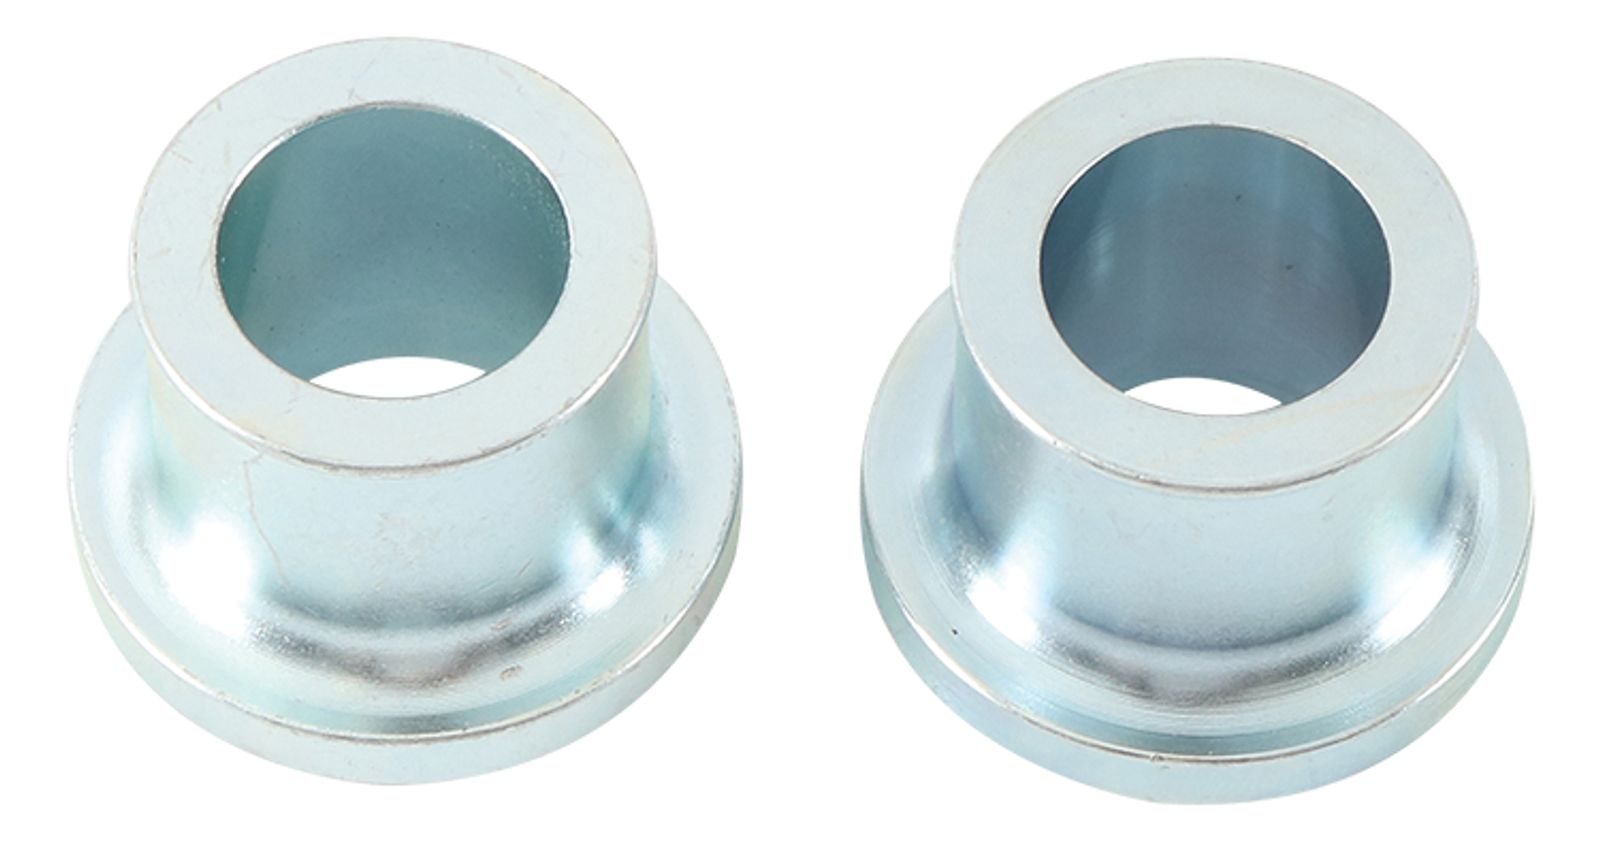 Wrp Rear Wheel Spacer Kits - WRP111106 image